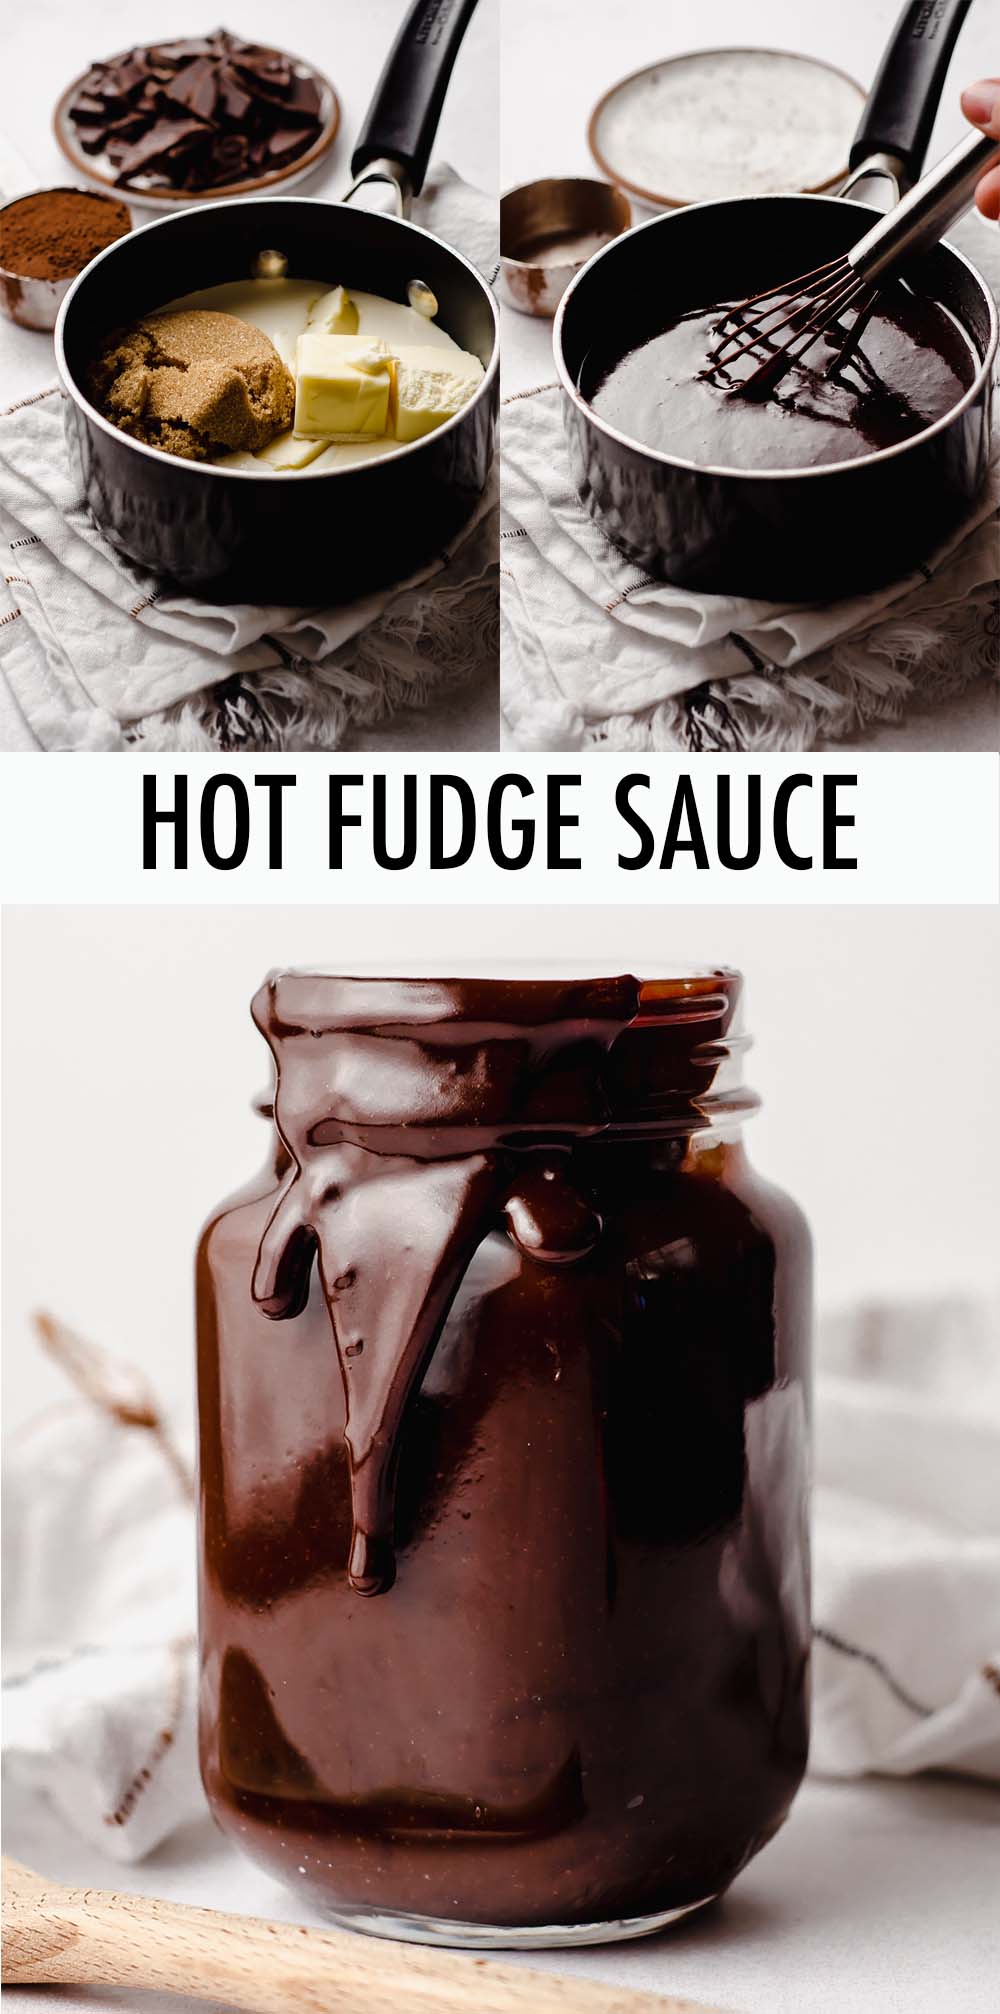 You only need five major ingredients and less than 10 minutes to make your own rich and thick hot fudge sauce at home. Use as an ice cream topping, on top of your favorite baked goods, or to make chocolate milk or hot chocolate! via @frshaprilflours